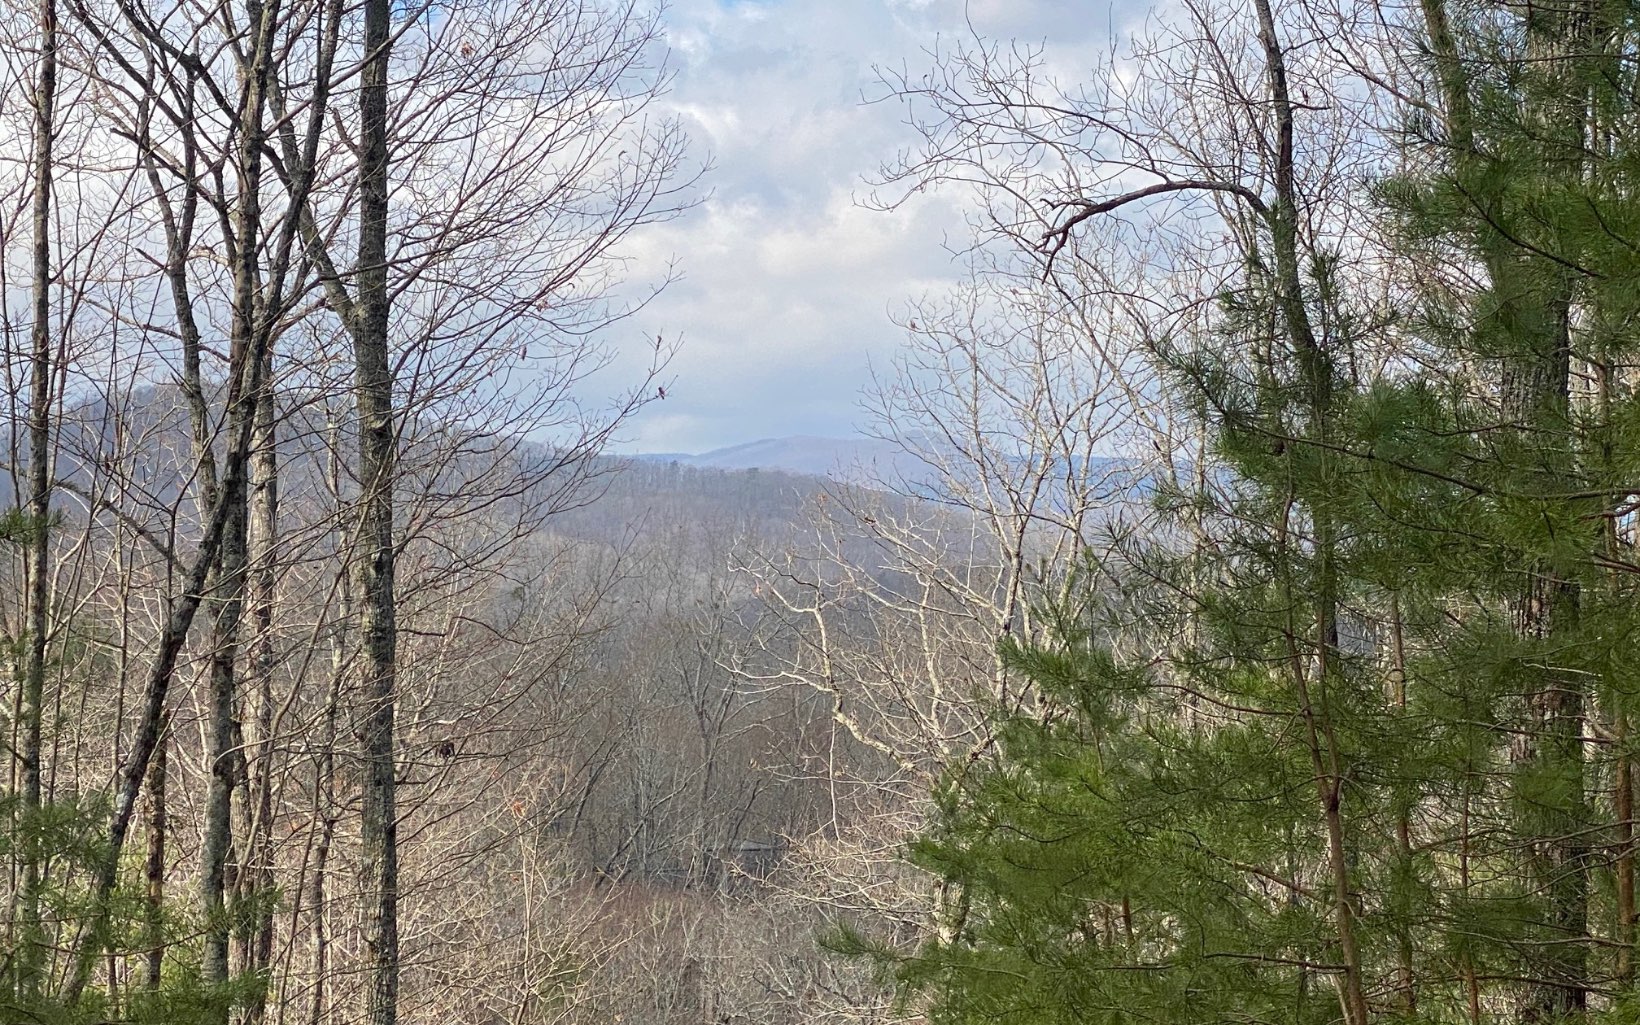 Stunning Year Round Mountain Views from this 1+ acre lot in the popular Cohutta/ Sunrock area. Easy drive to Historic Downtown Blue Ridge and all of the outdoor activities this area has to offer. Community water, & underground power. Additional lots available.